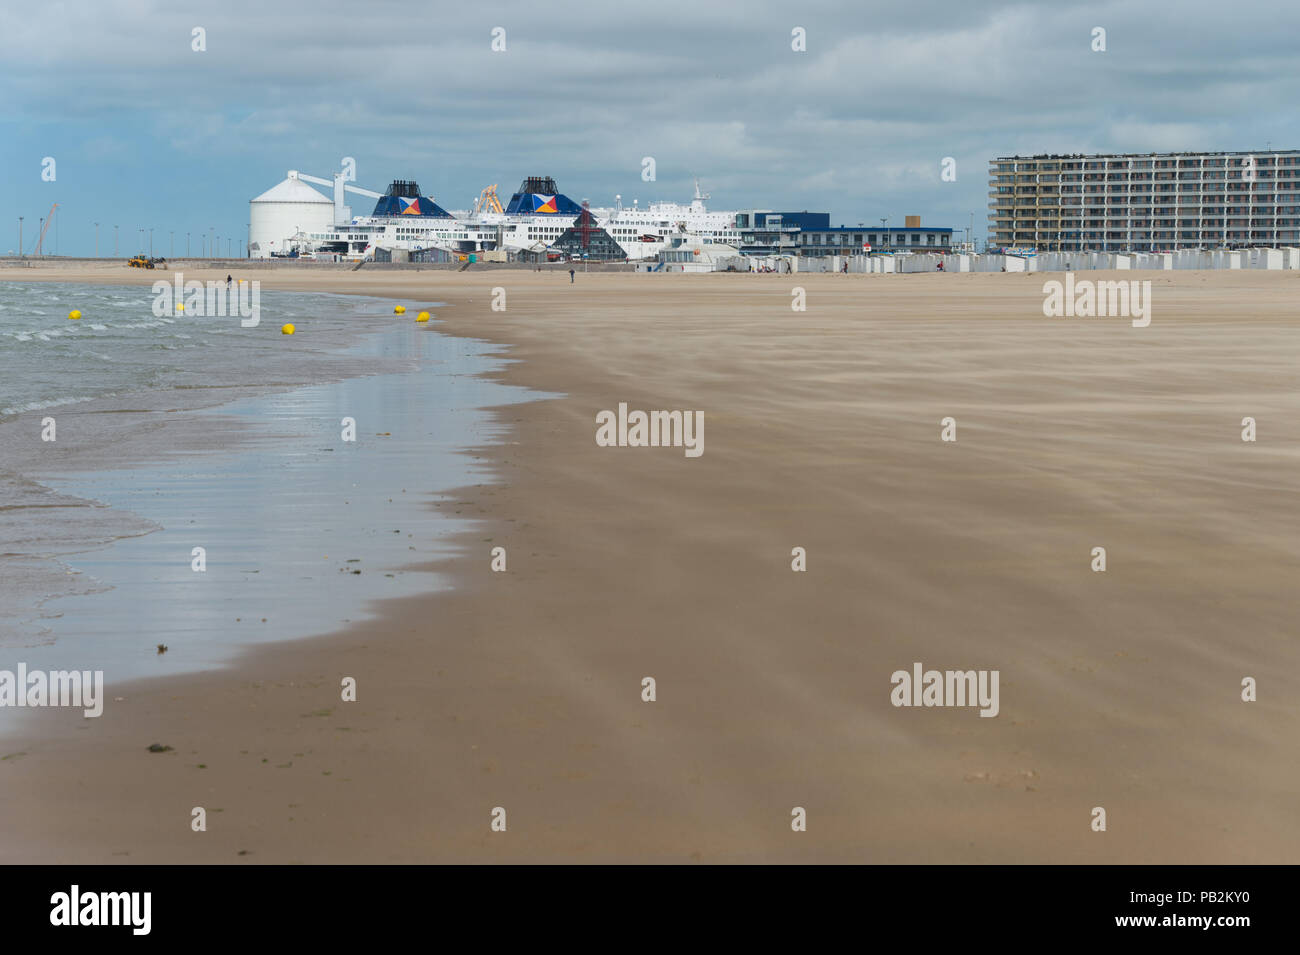 Calais, France - 19 June 2018: Beach at low tide in summer and ferry docked in the harbor. Stock Photo